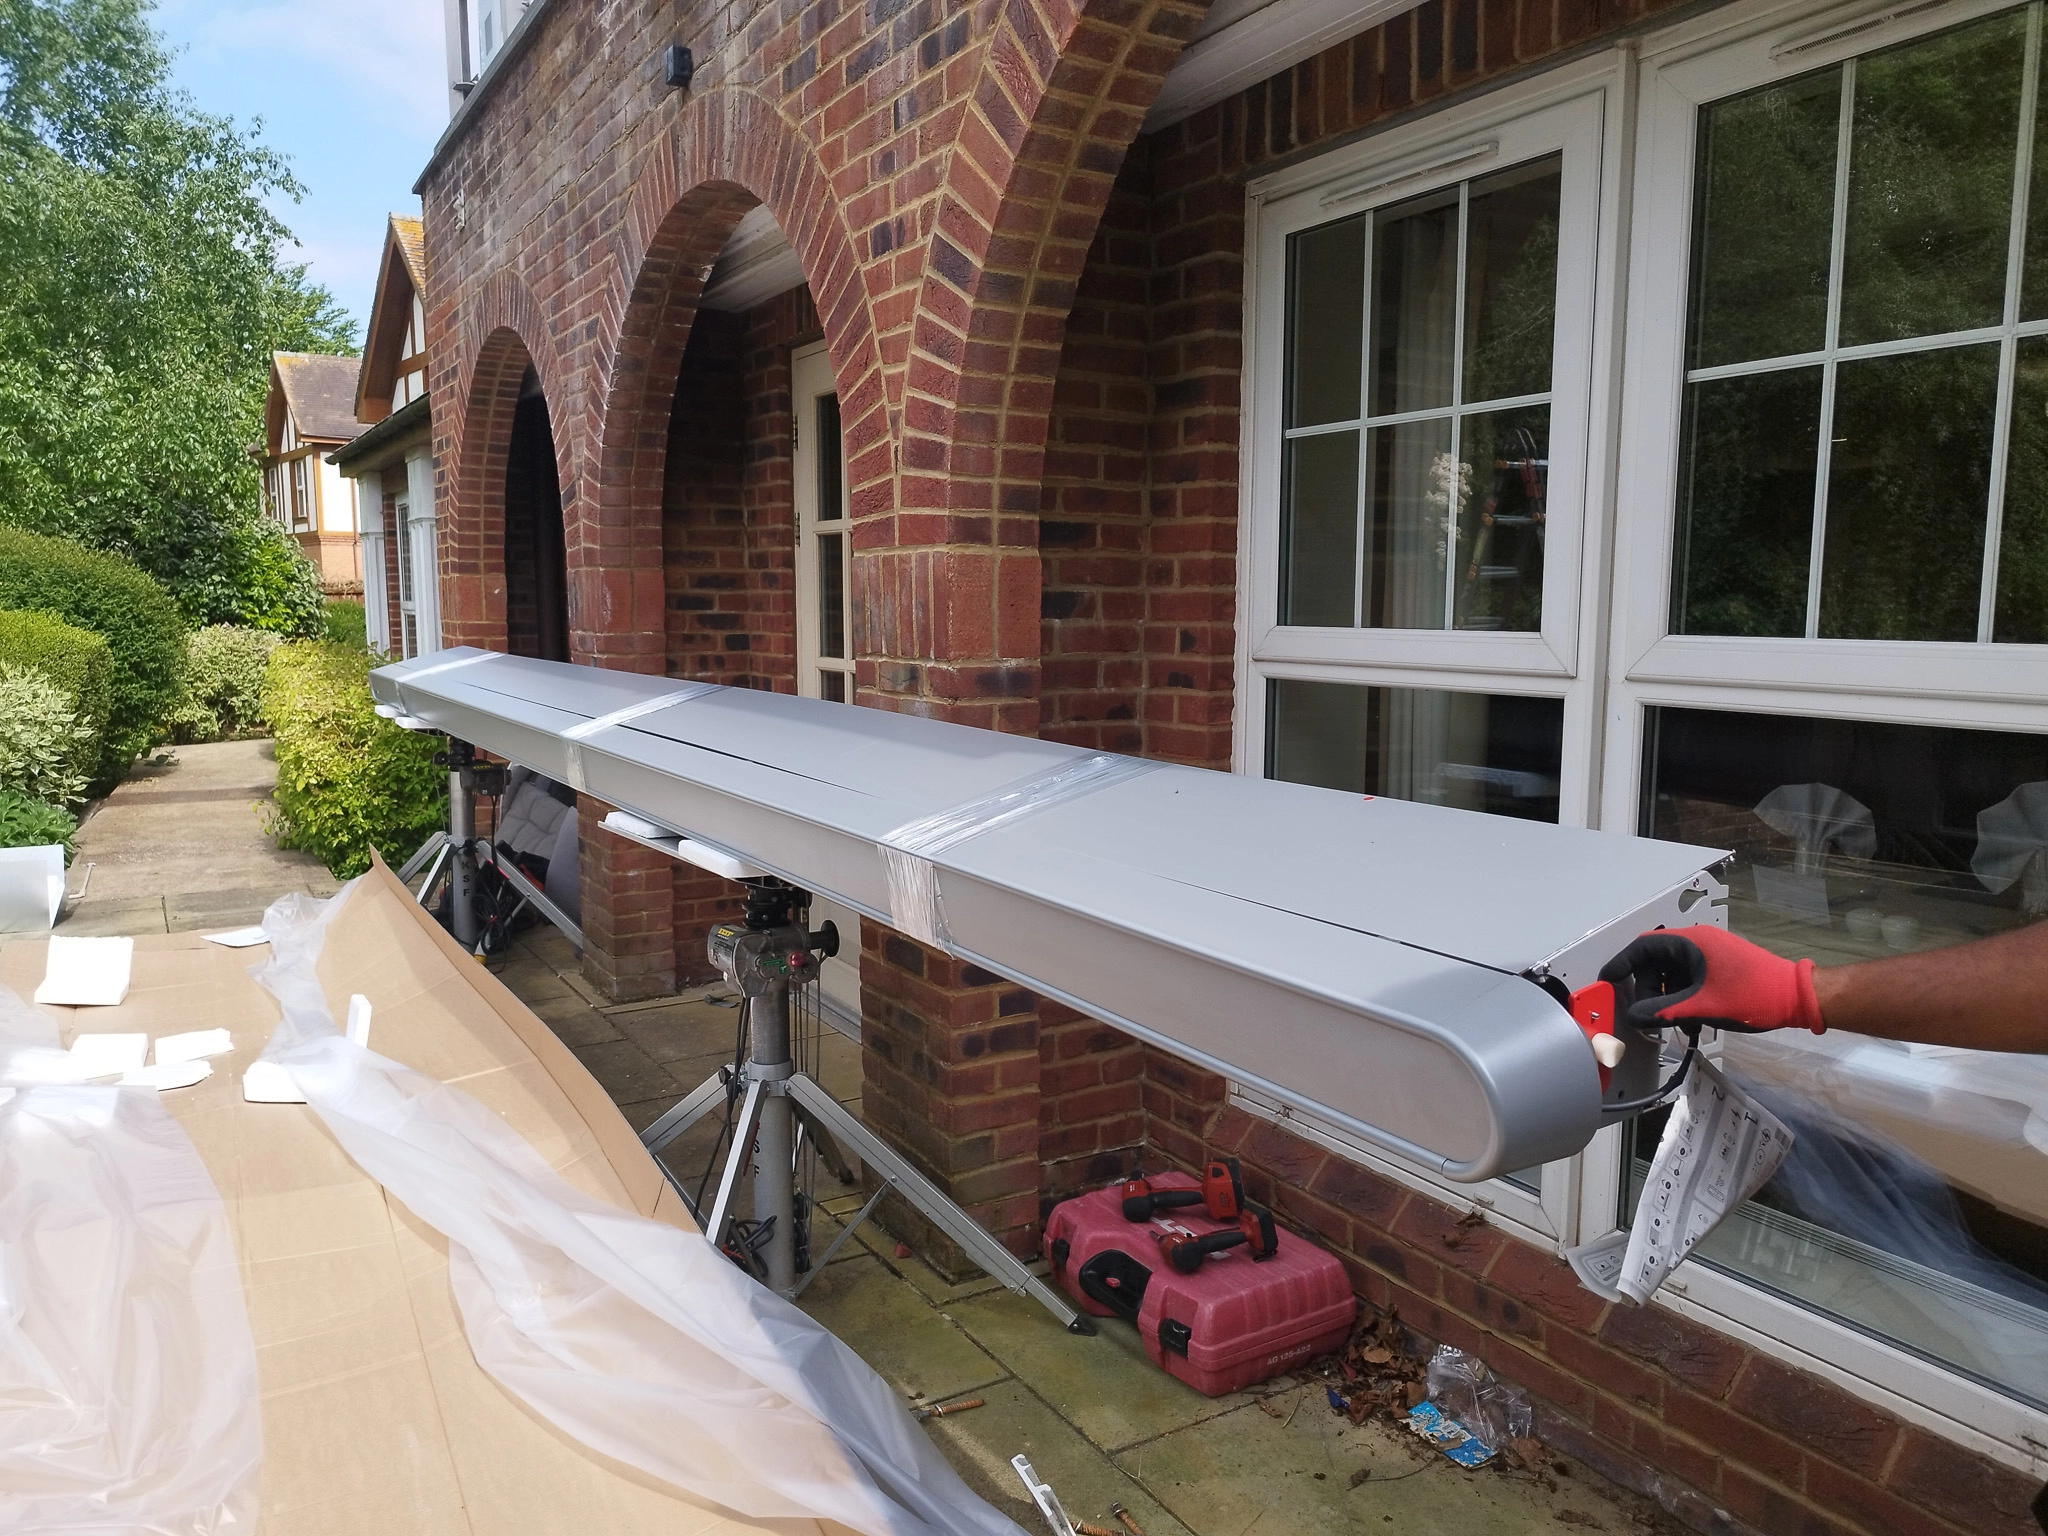 Unboxed MX-1 6-meter awning ready for installation